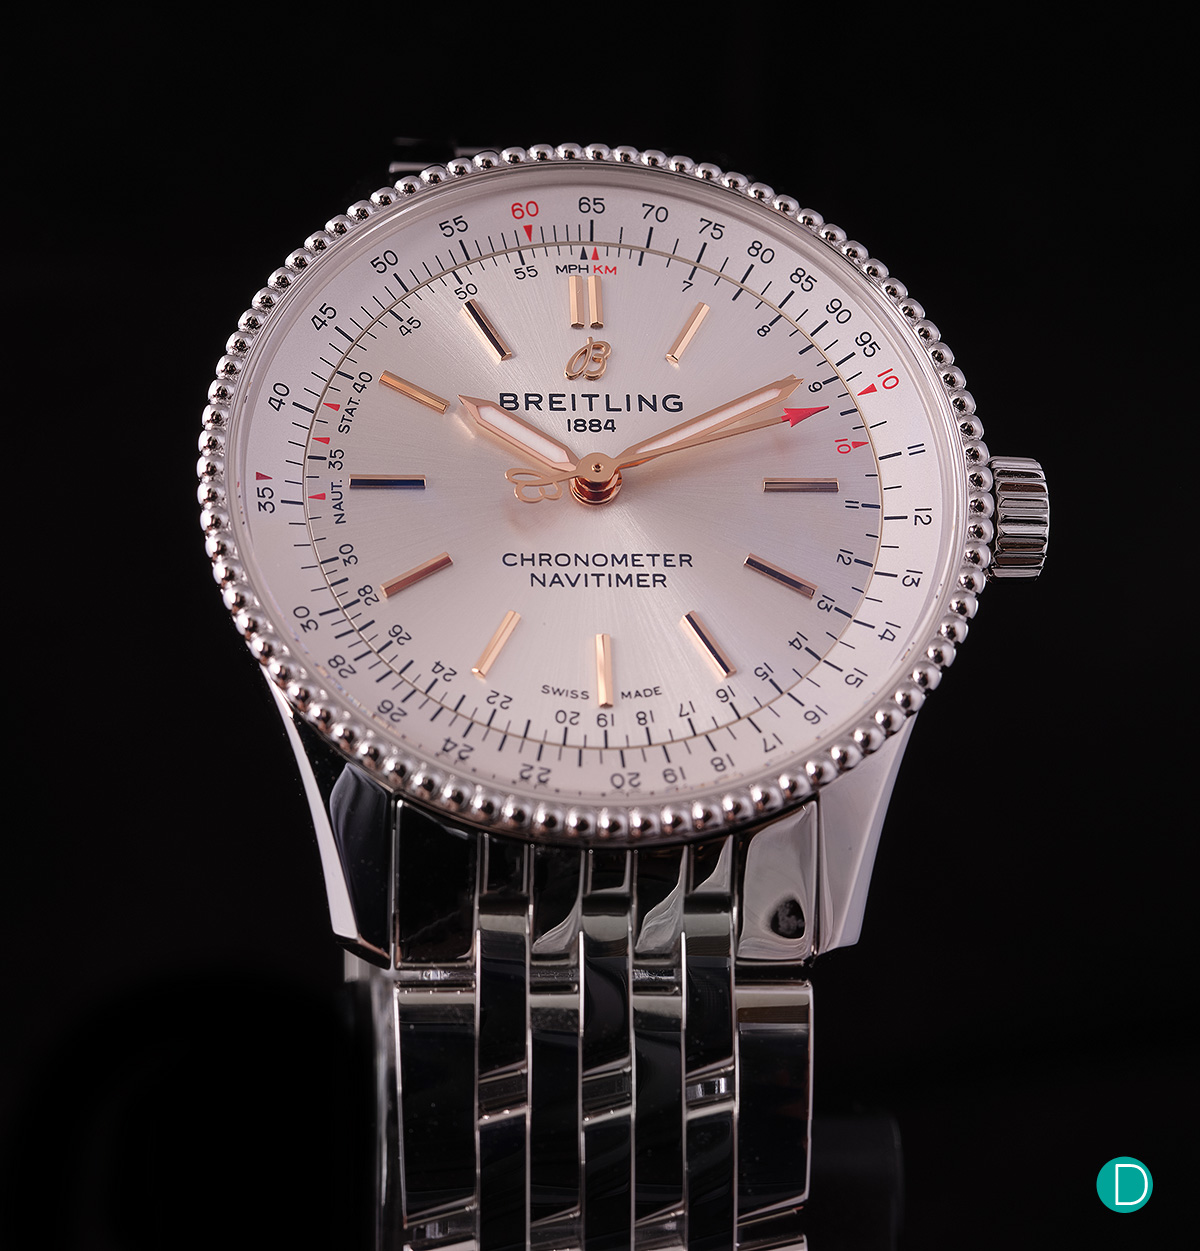 New: Breitling Novelties for 2020 with live photographs